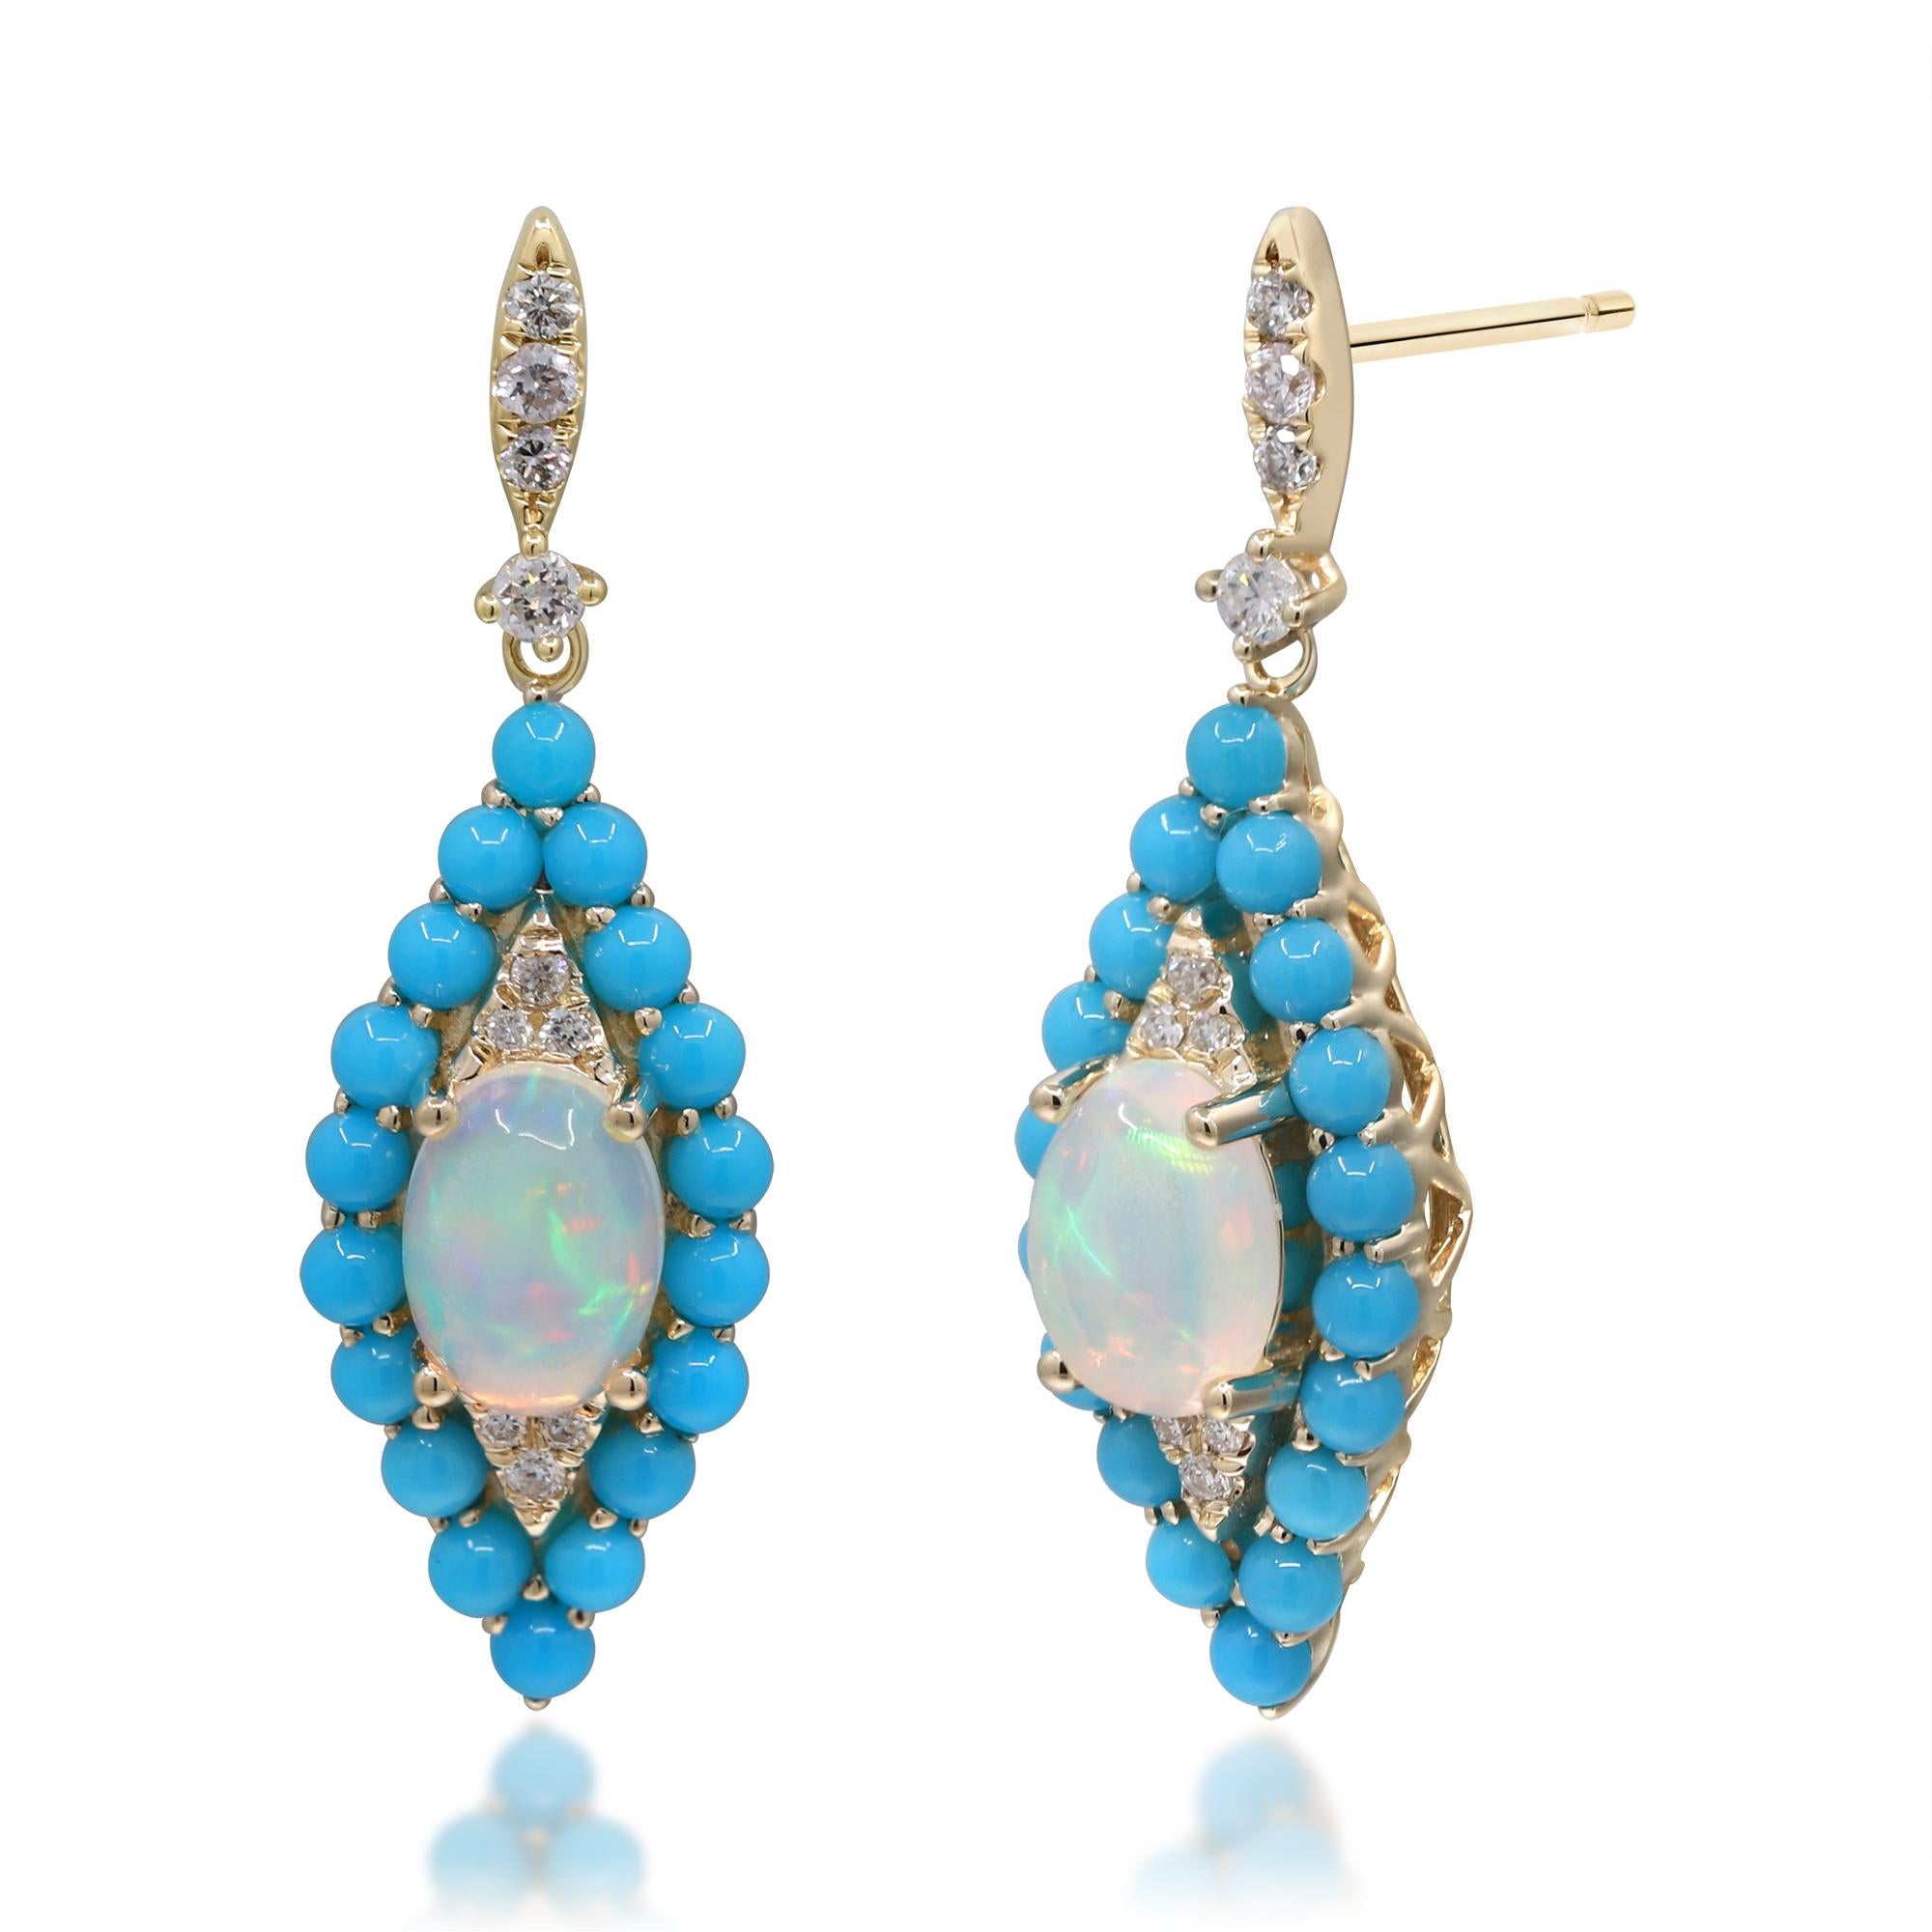 Decorate yourself in elegance with this Earring is crafted from 14K Yellow Gold by Gin & Grace. This Earring is made up of Oval-Cut Ethiopian Opal (2 pcs) 1.08 carat, Round-cut Turquoise (36 pcs) 1.54 carat and Round-cut White Diamond (20 Pcs) 0.16